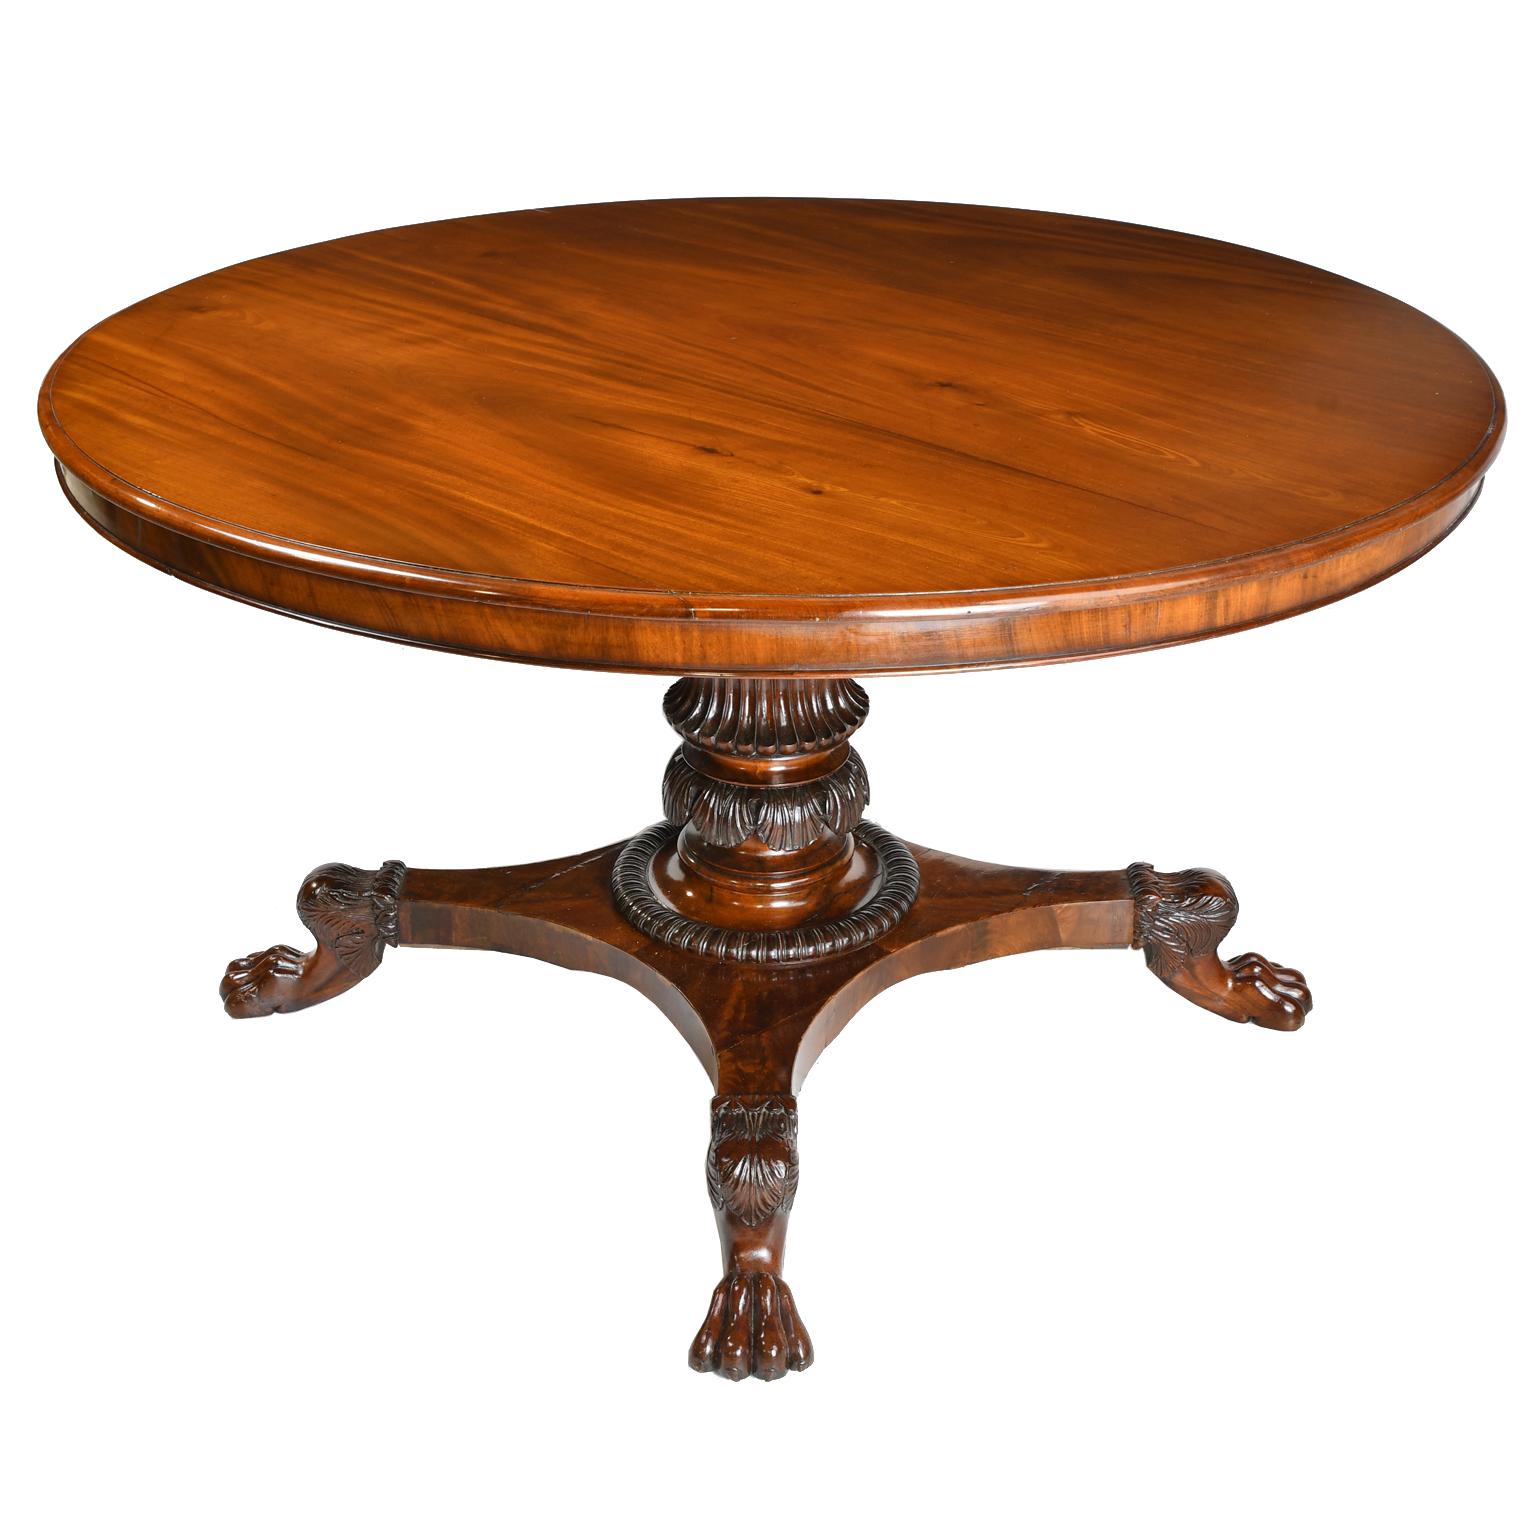 A beautifully articulated Danish Empire center pedestal table in fine mahogany with exceptionally well-carved turned pillar on quatre-form base terminating on four lion's paw feet. This remarkable piece would make an elegant hall table or an